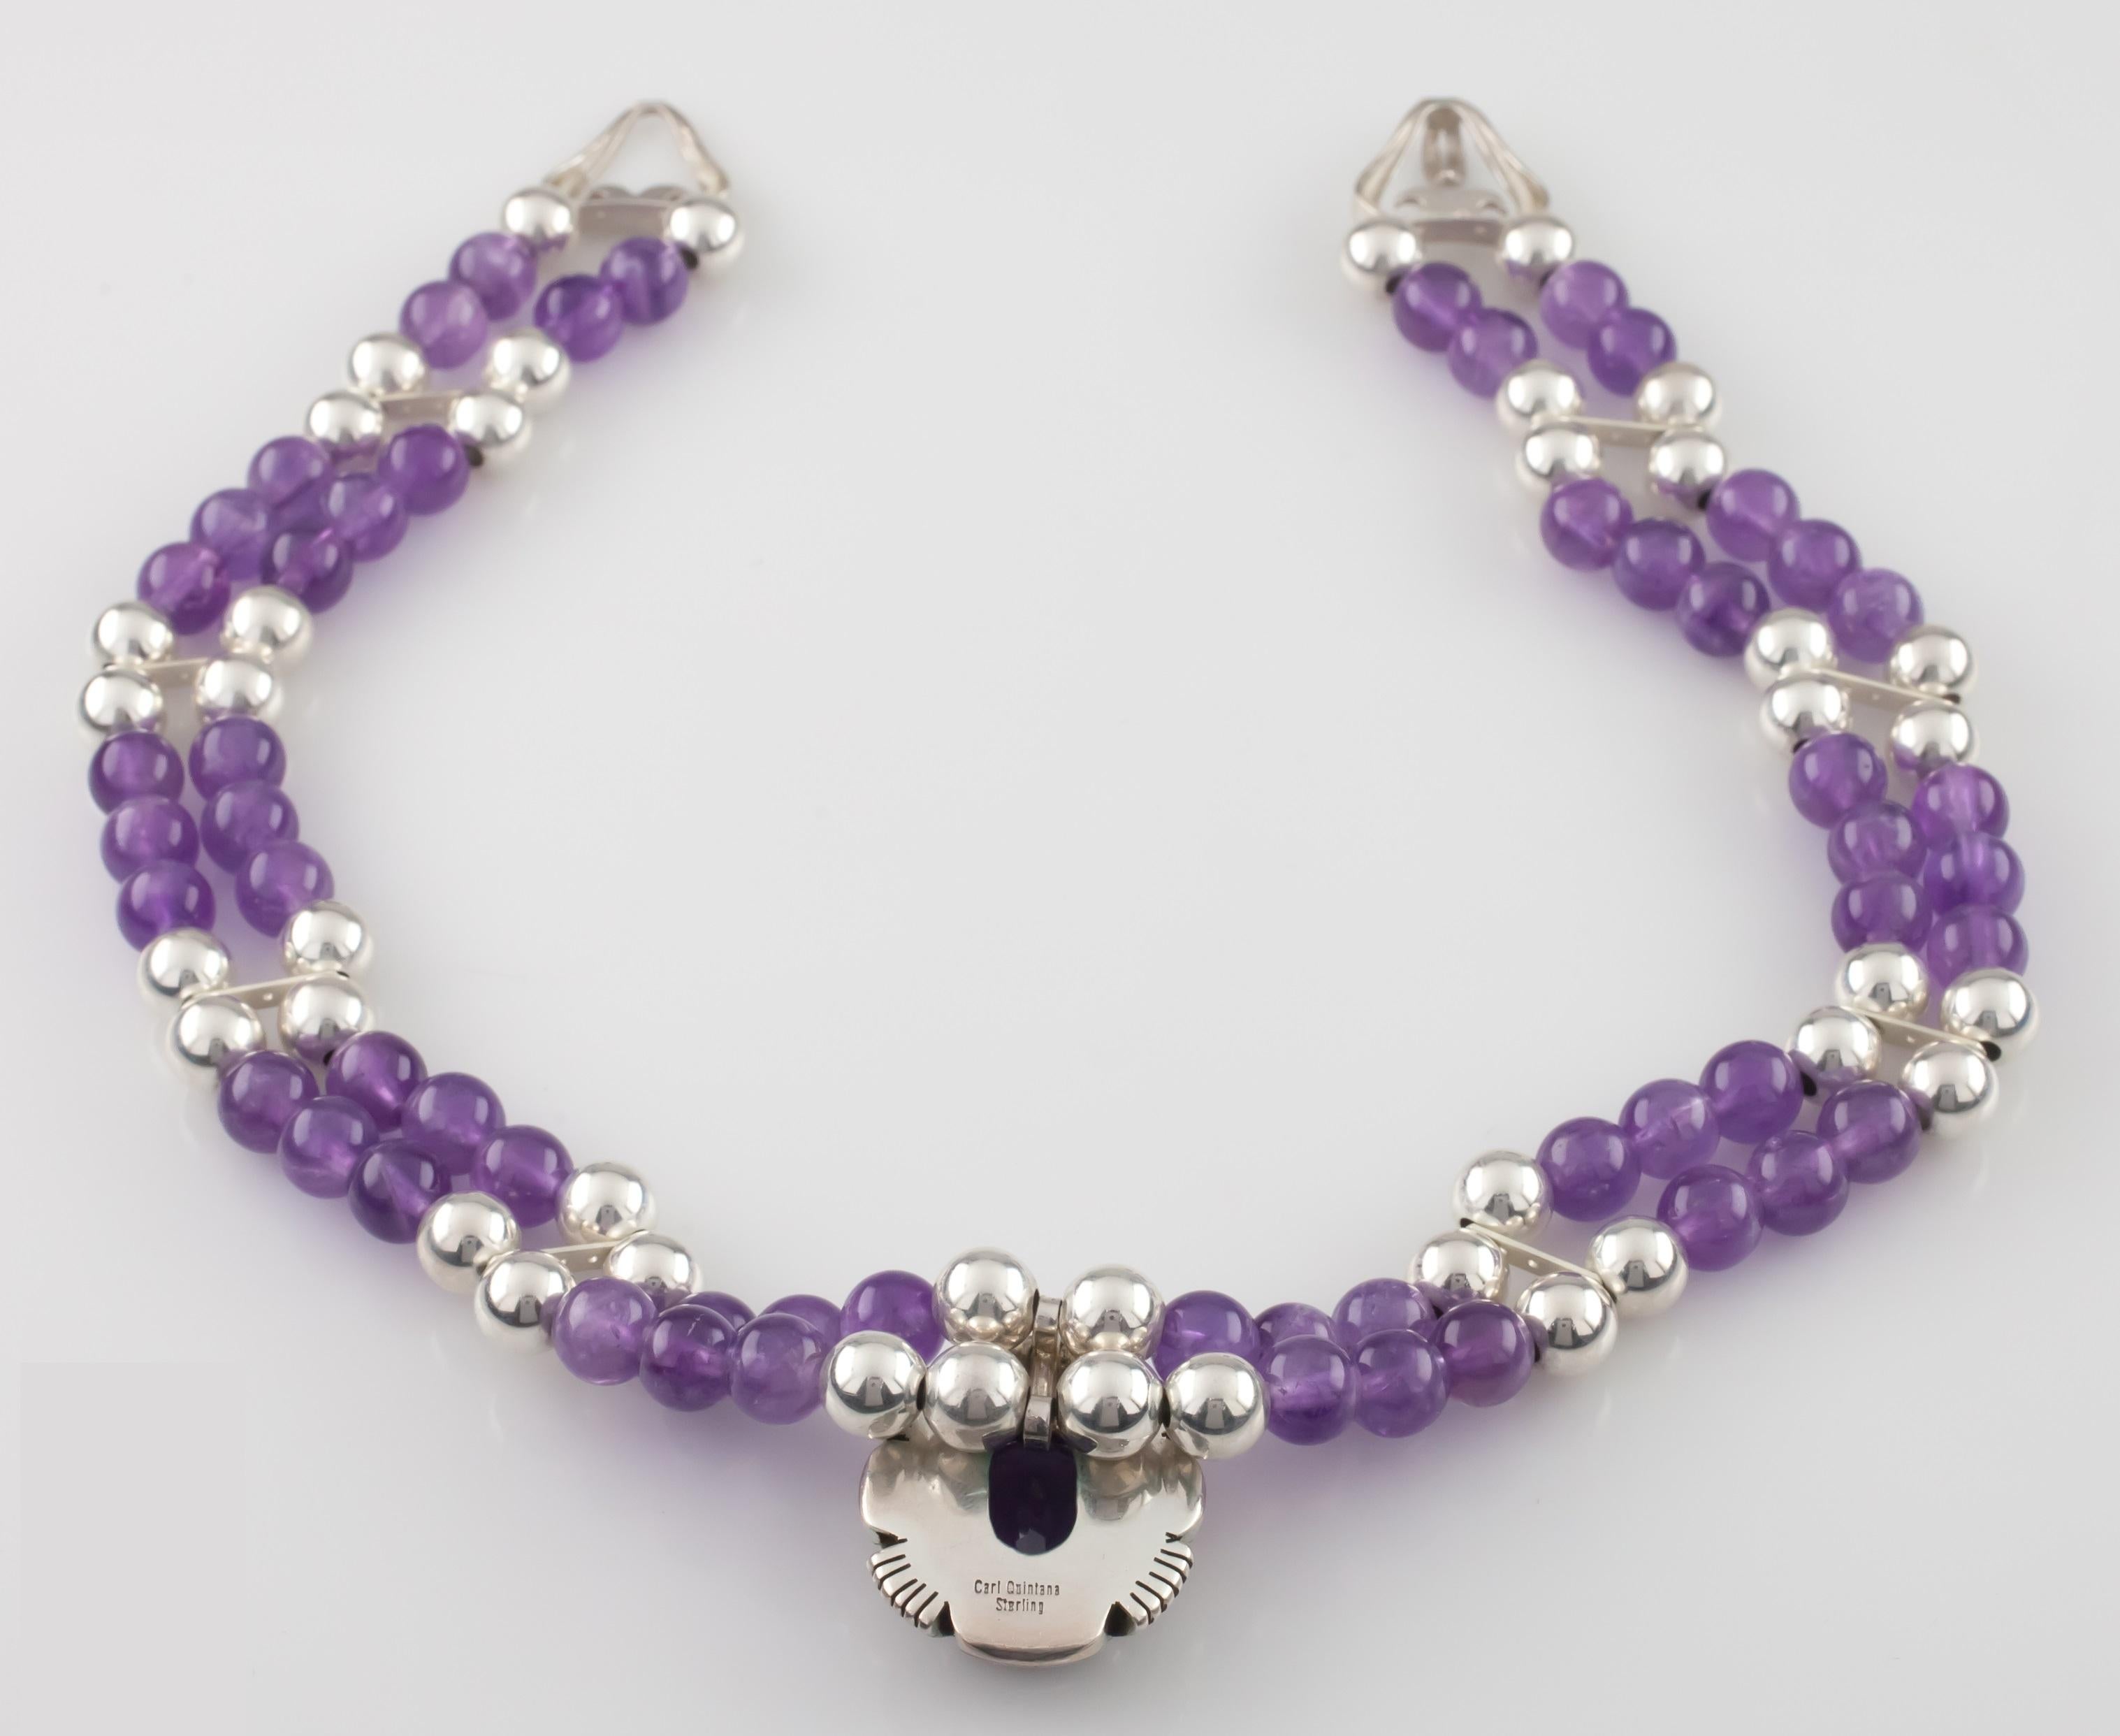 Bead Carl Quintana Navajo Amethyst and Sterling Silver Necklace For Sale